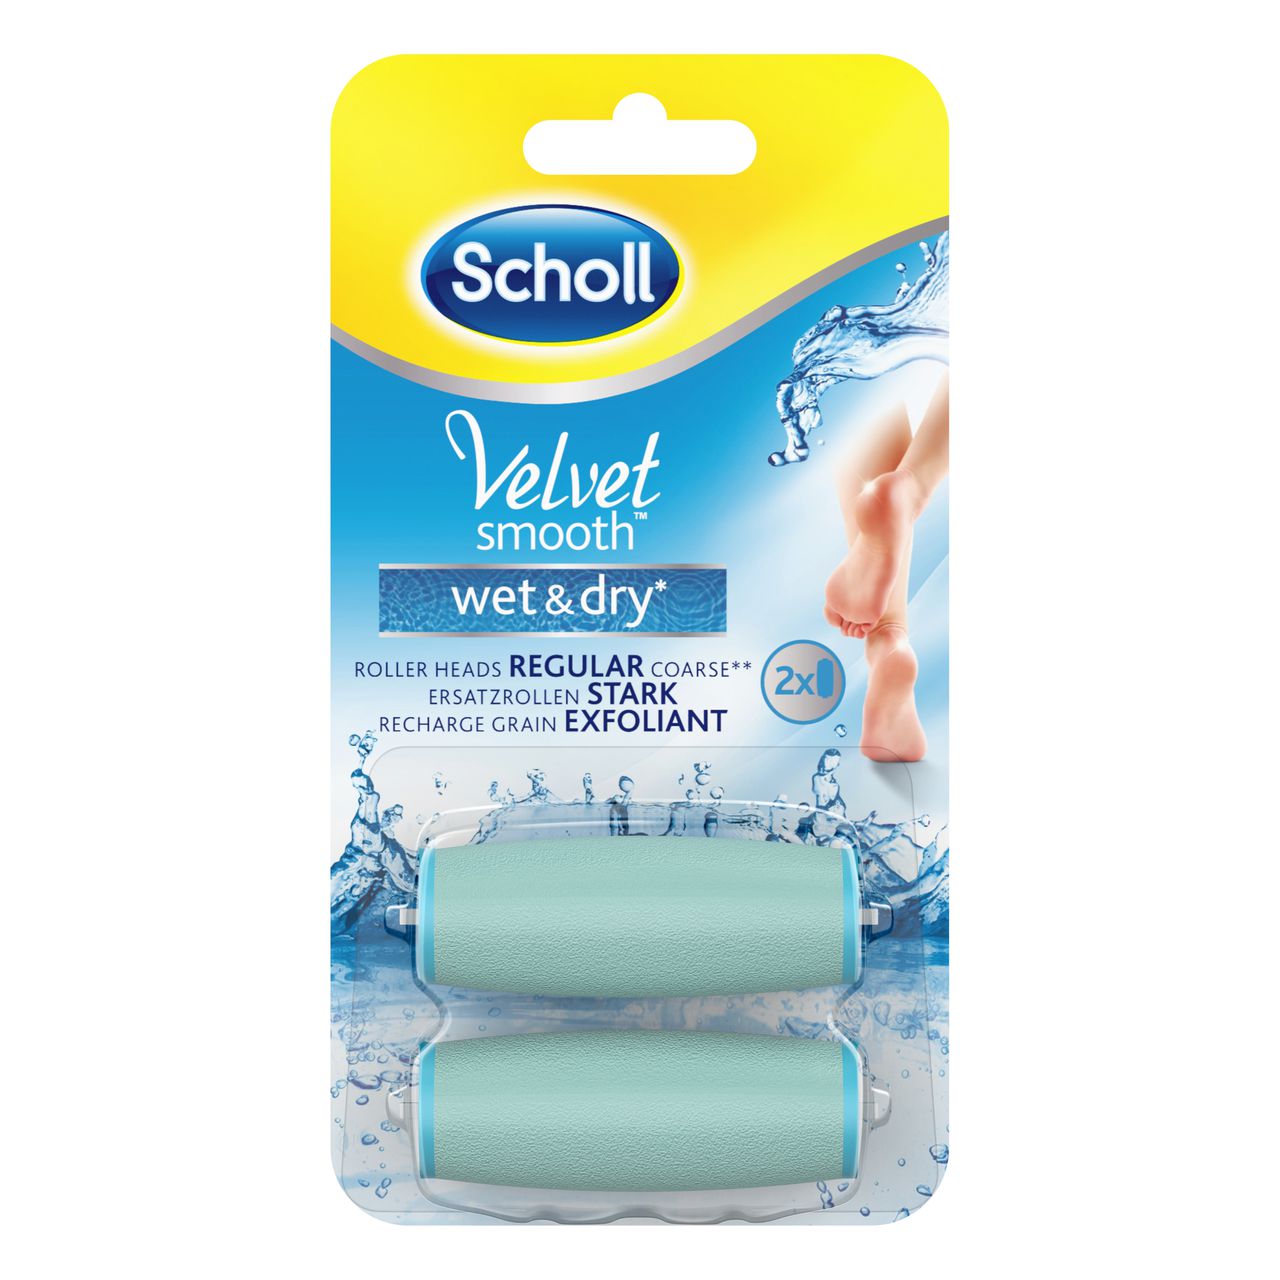 Velvet Smooth Express Epdi & Dry rollers - Scholl